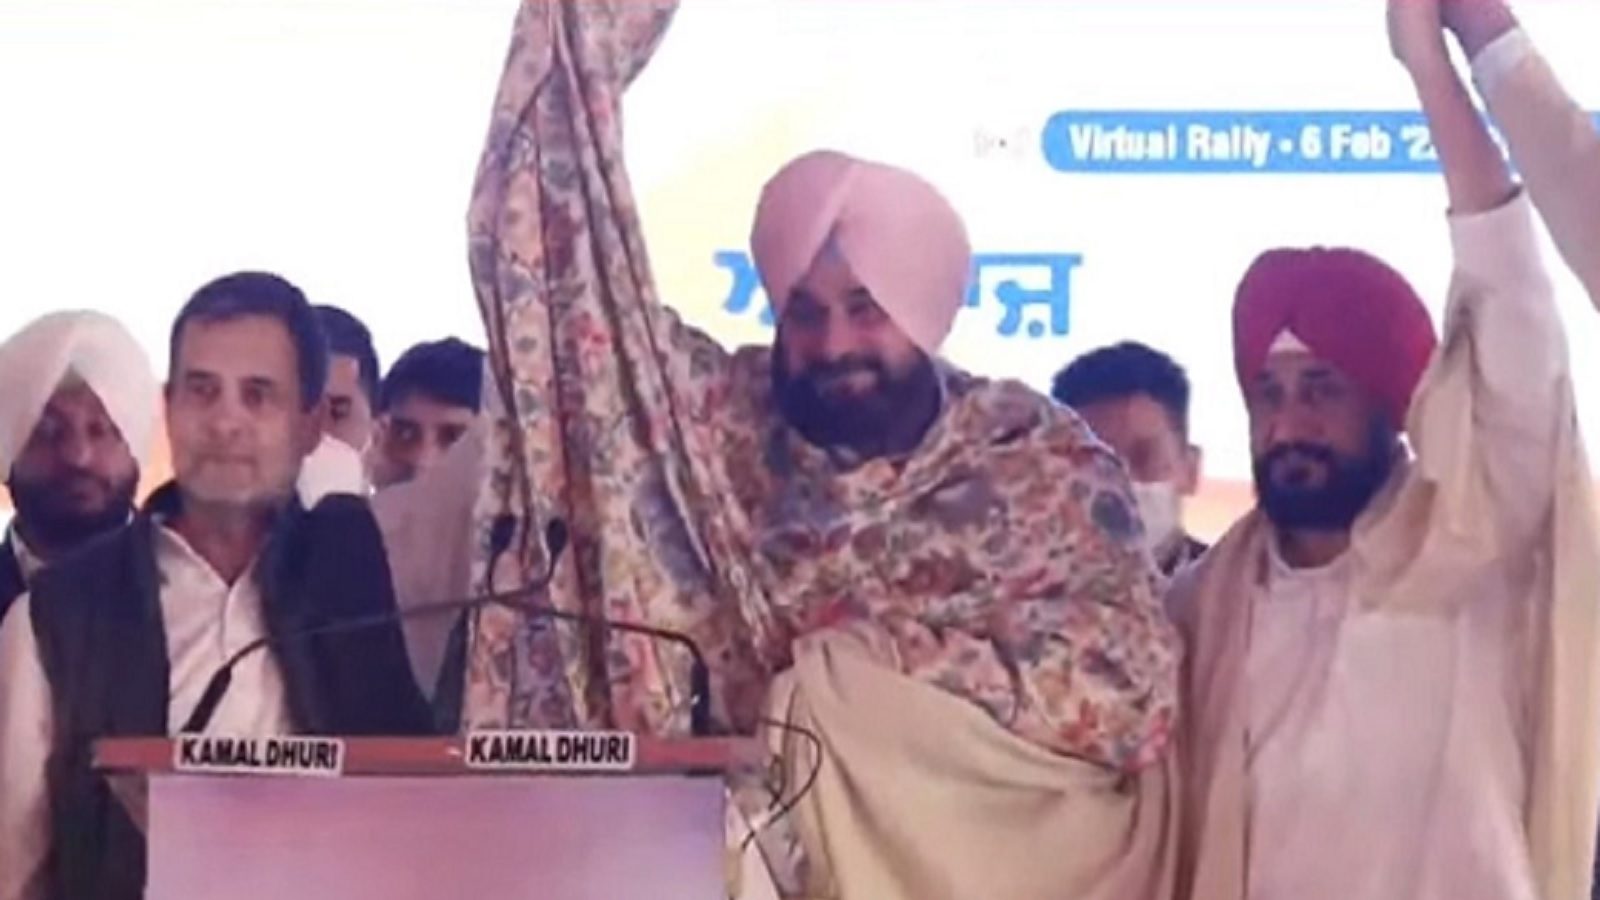 Punjab: Amarinder Singh’s party has taunted Sidhu since Channi became chief minister